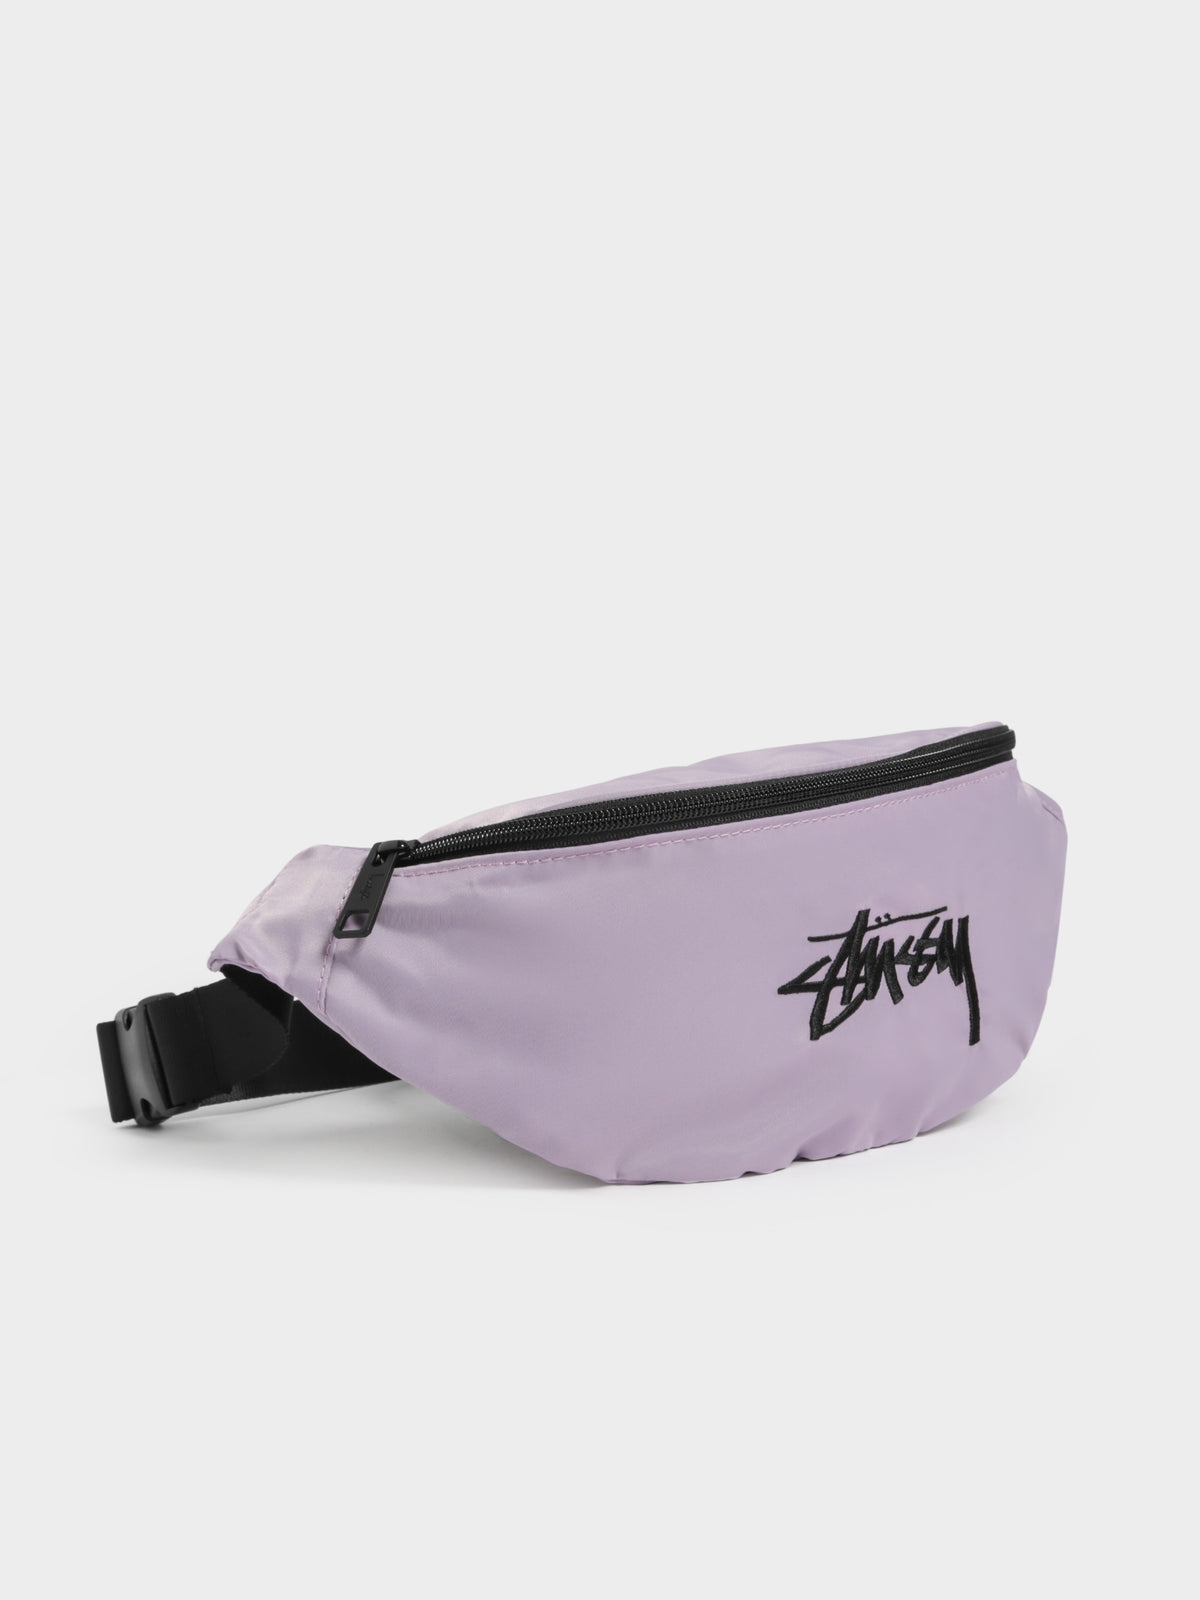 Stock Waistbag in Lilac